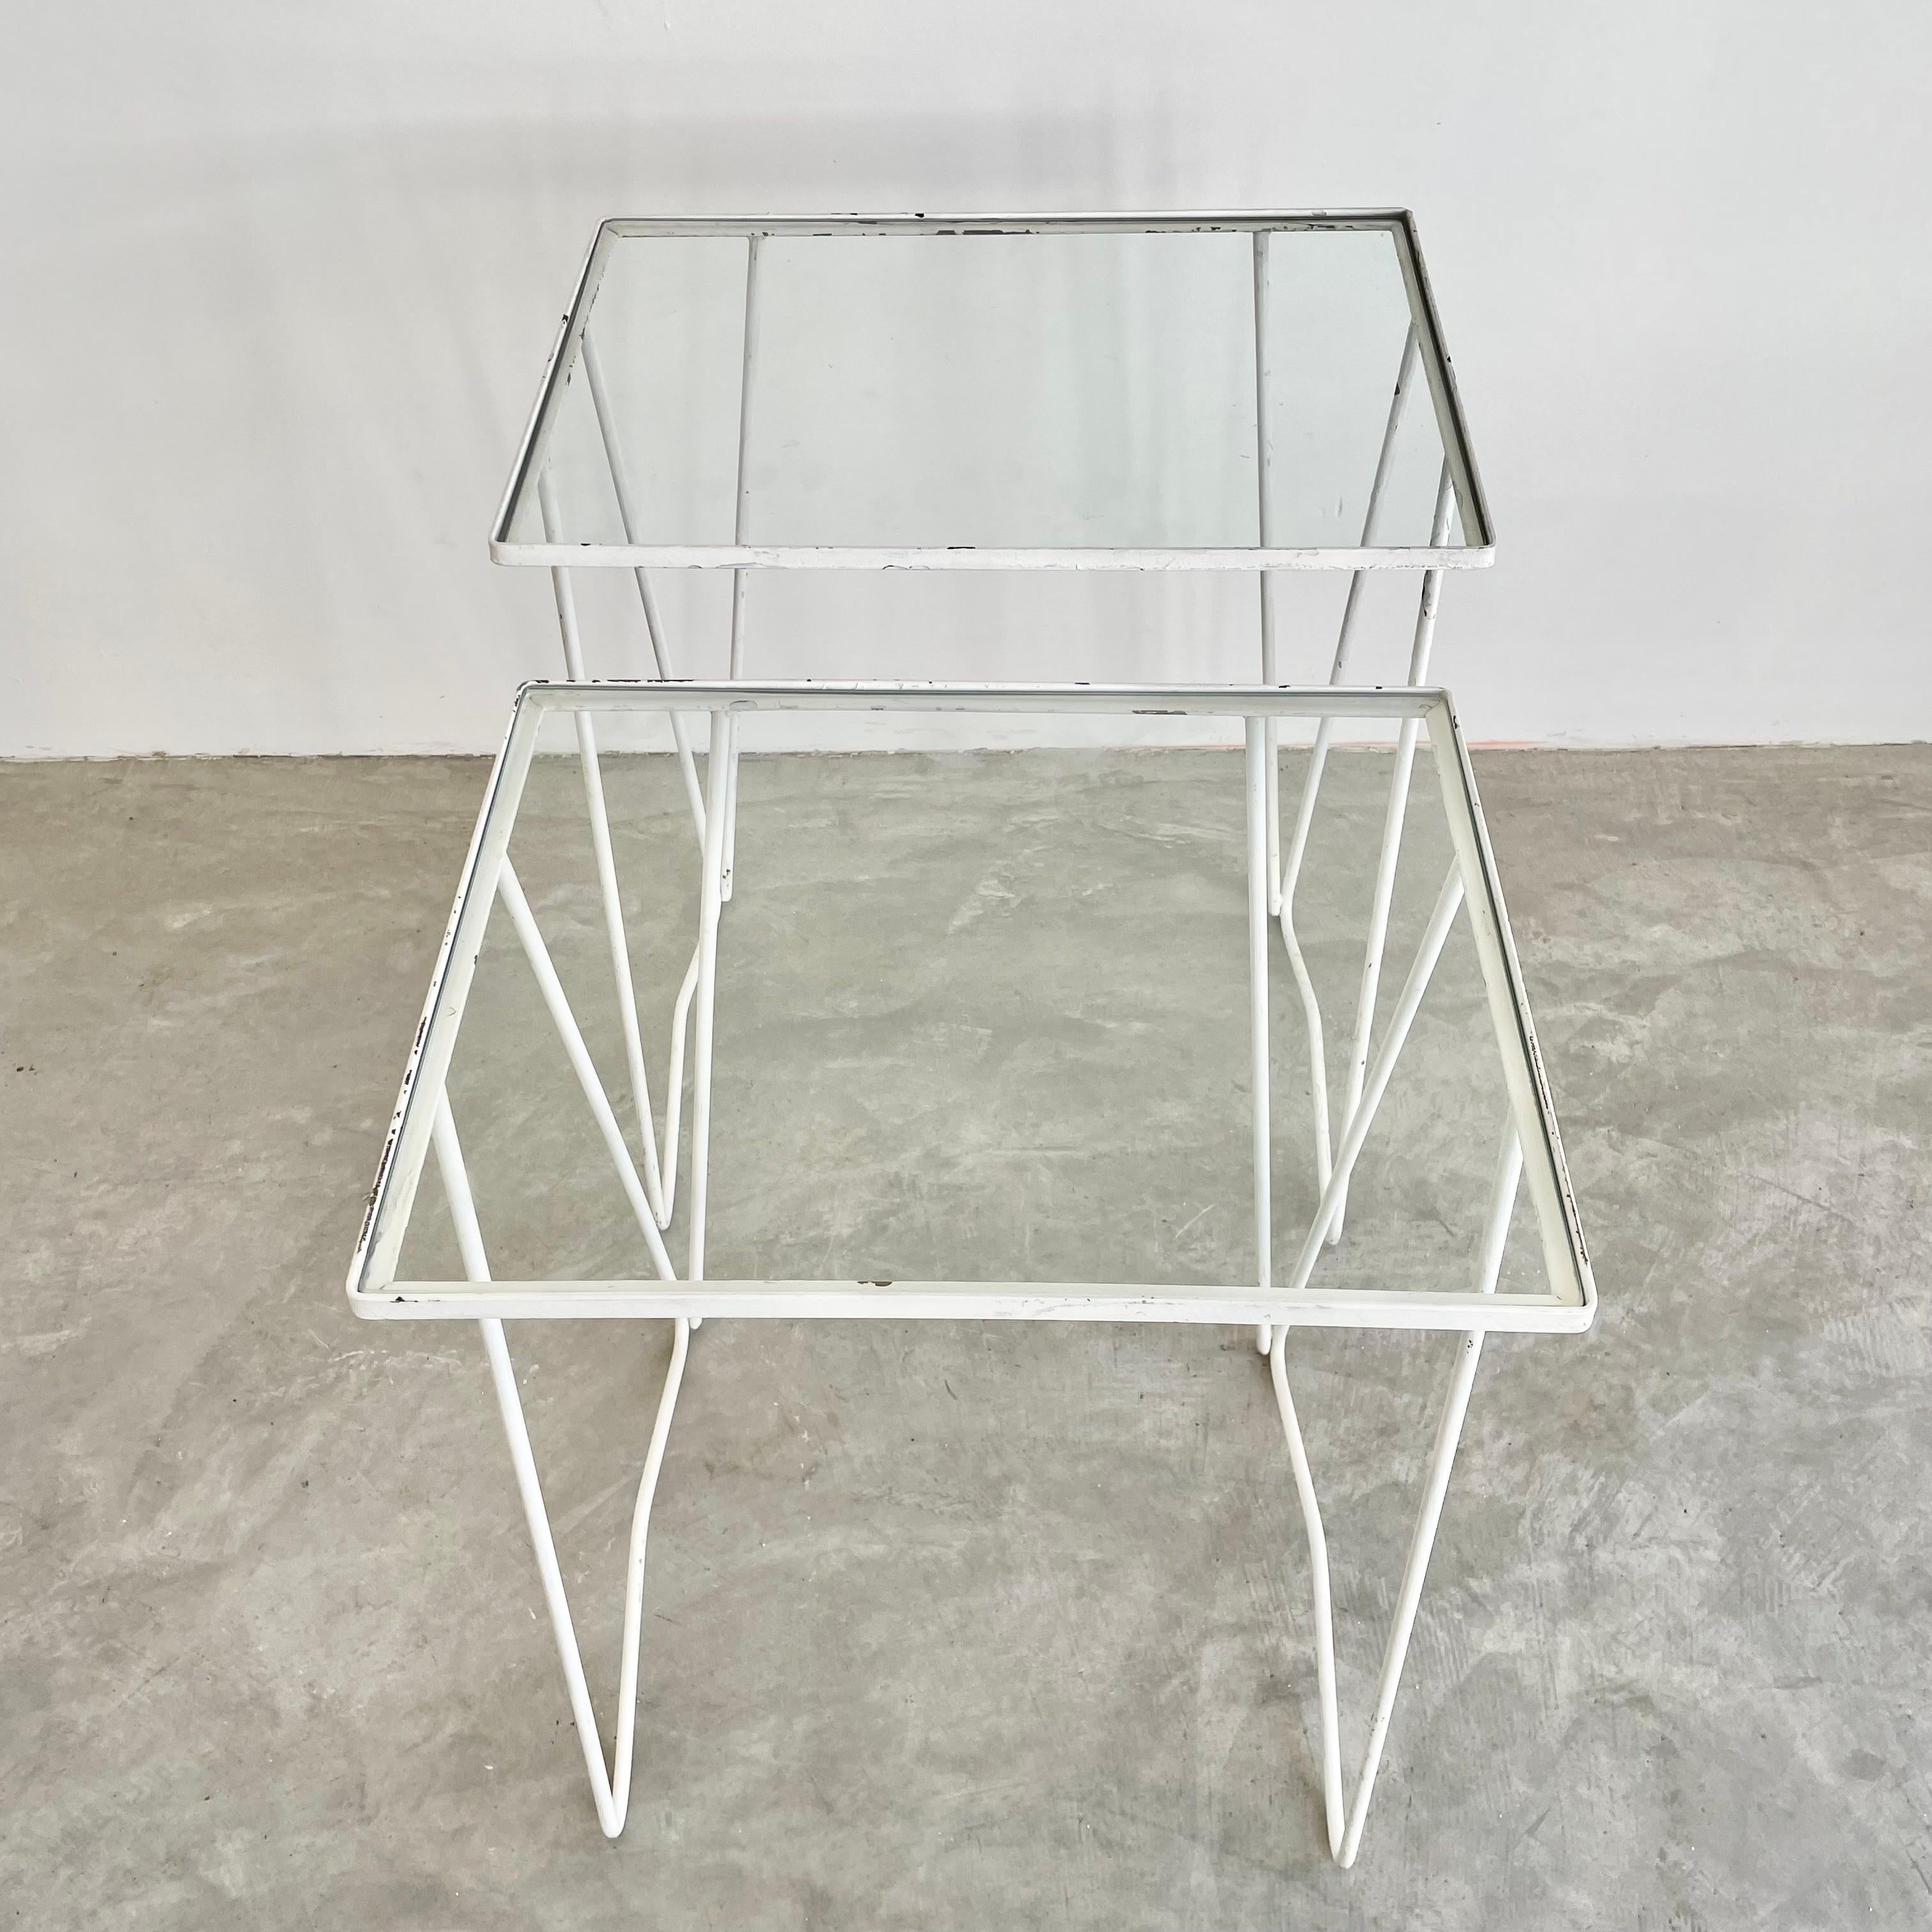 Pair of Iron and Glass Nesting Tables, 1970s USA For Sale 7